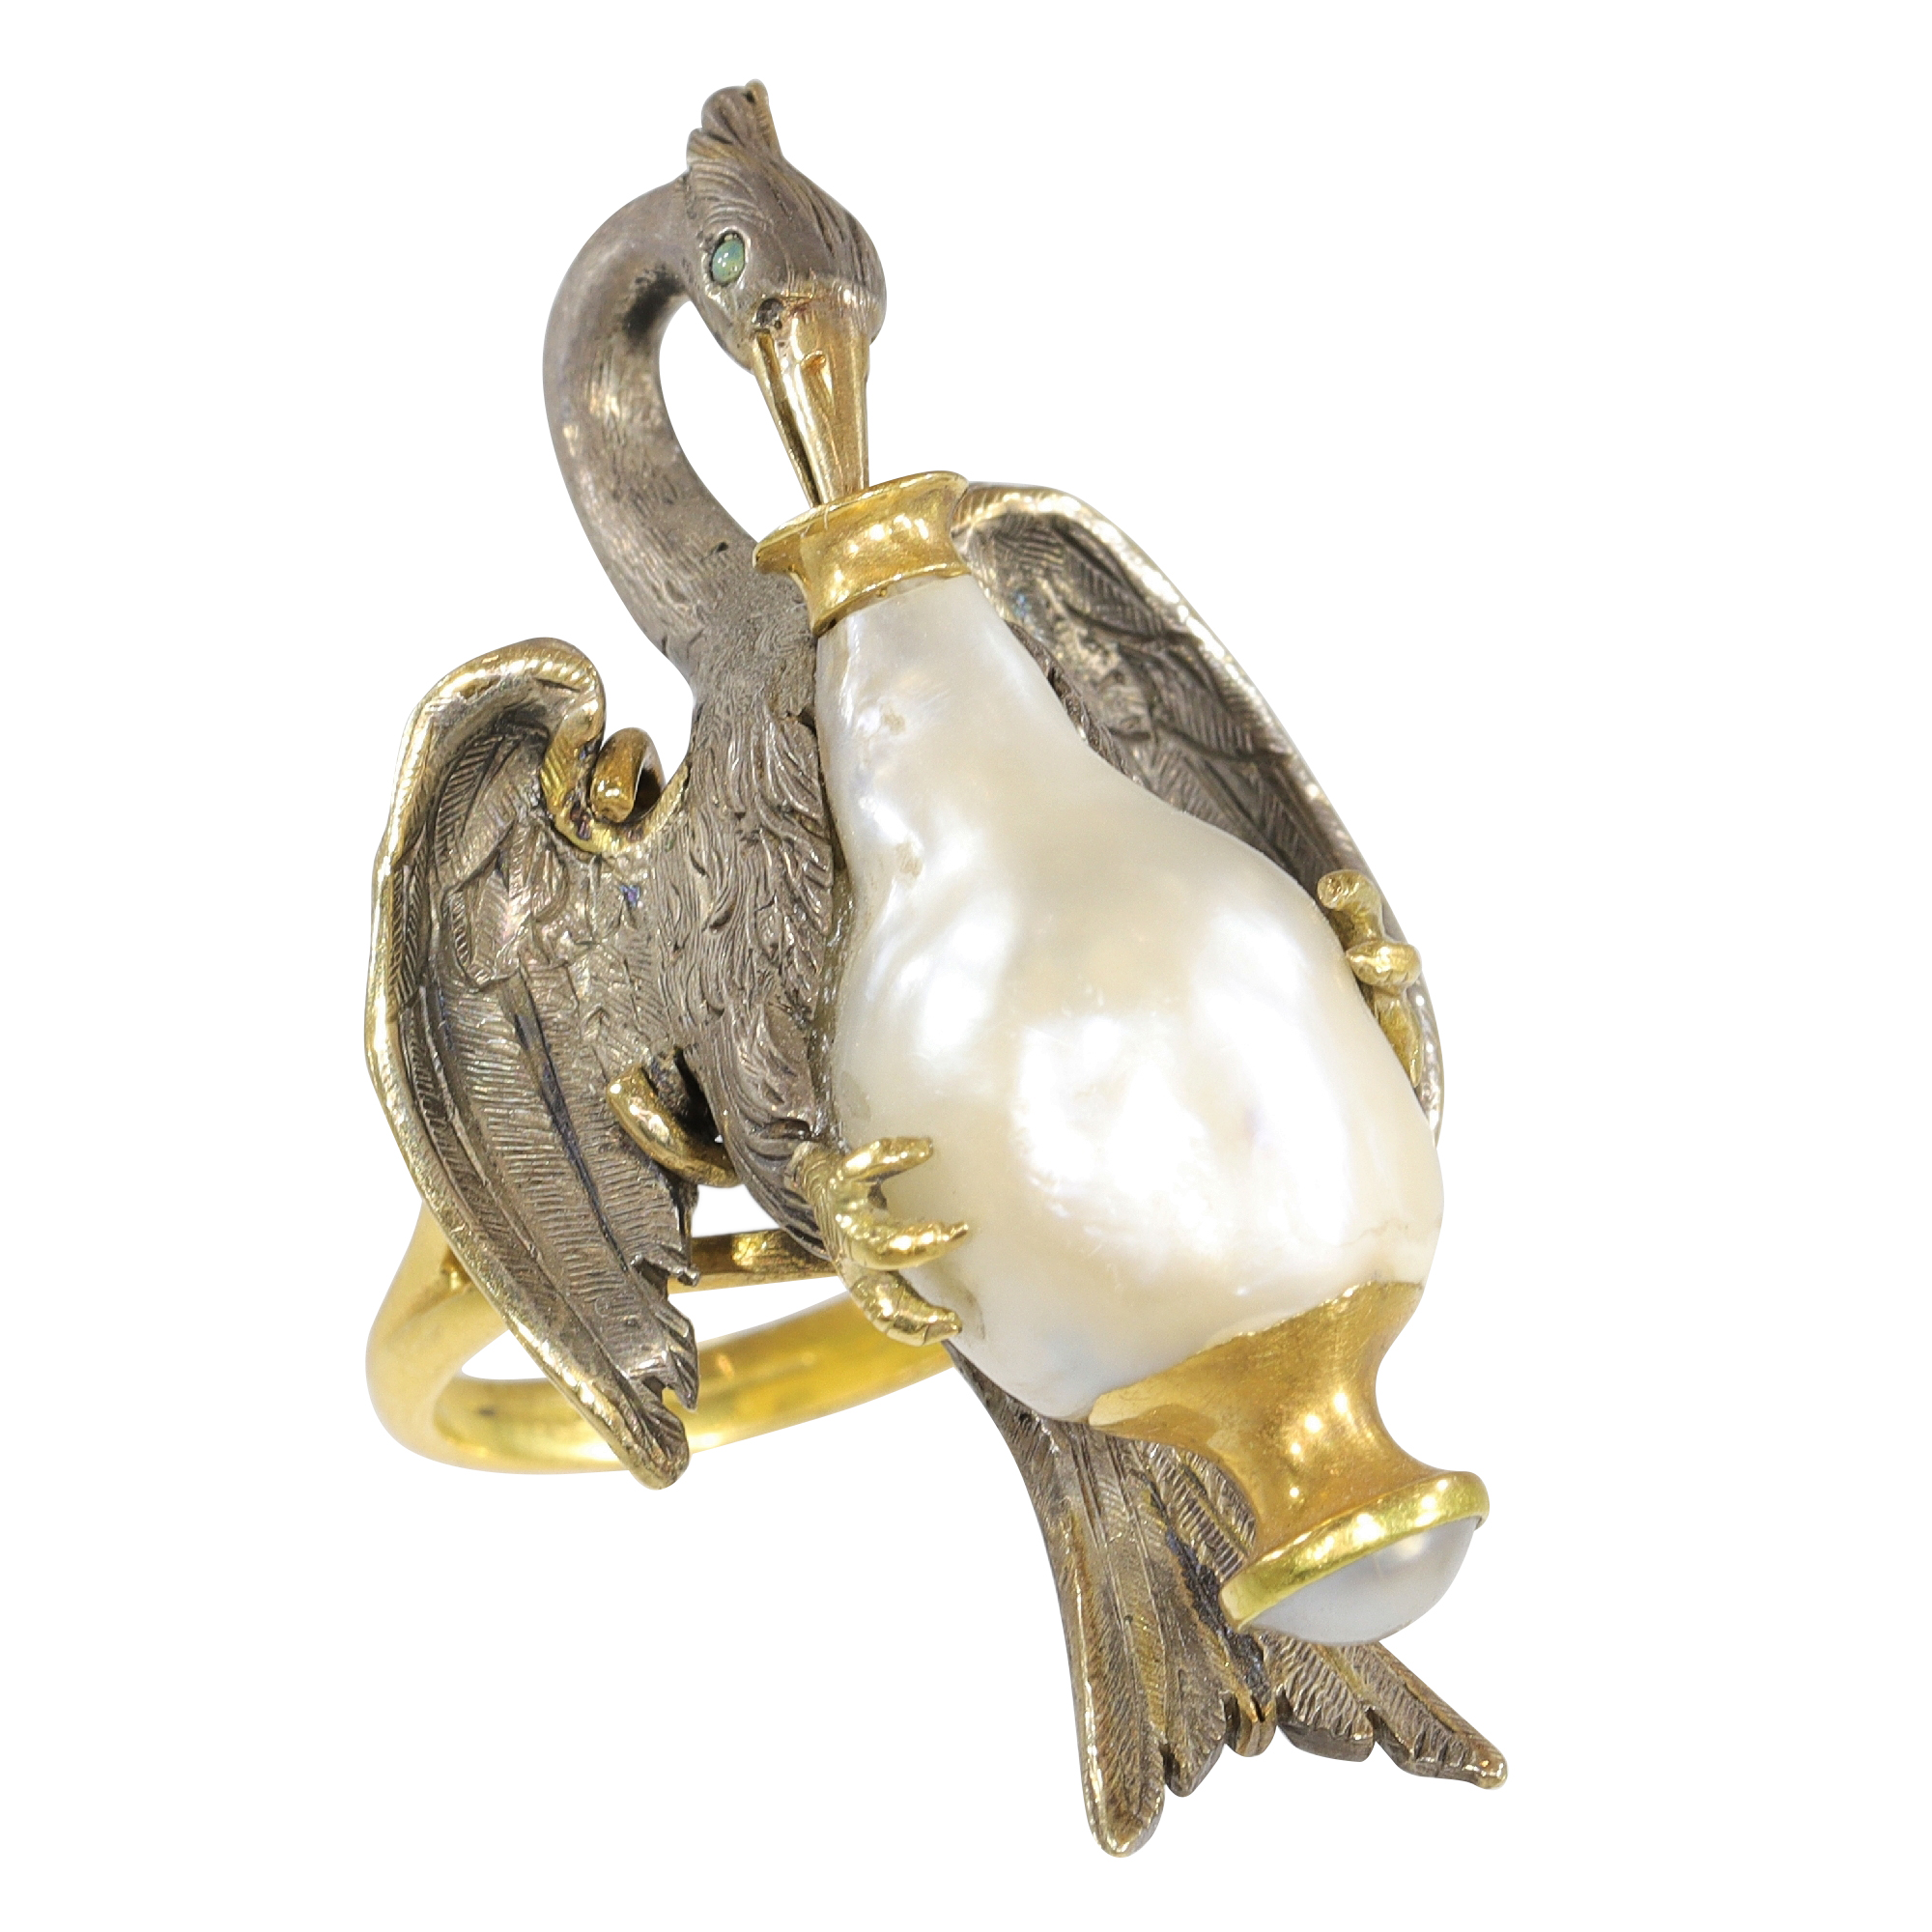 L'Art du Fable: 18K Gold Stork and Pearl Ring from Victorian France:  Description by Adin Antique Jewelry.